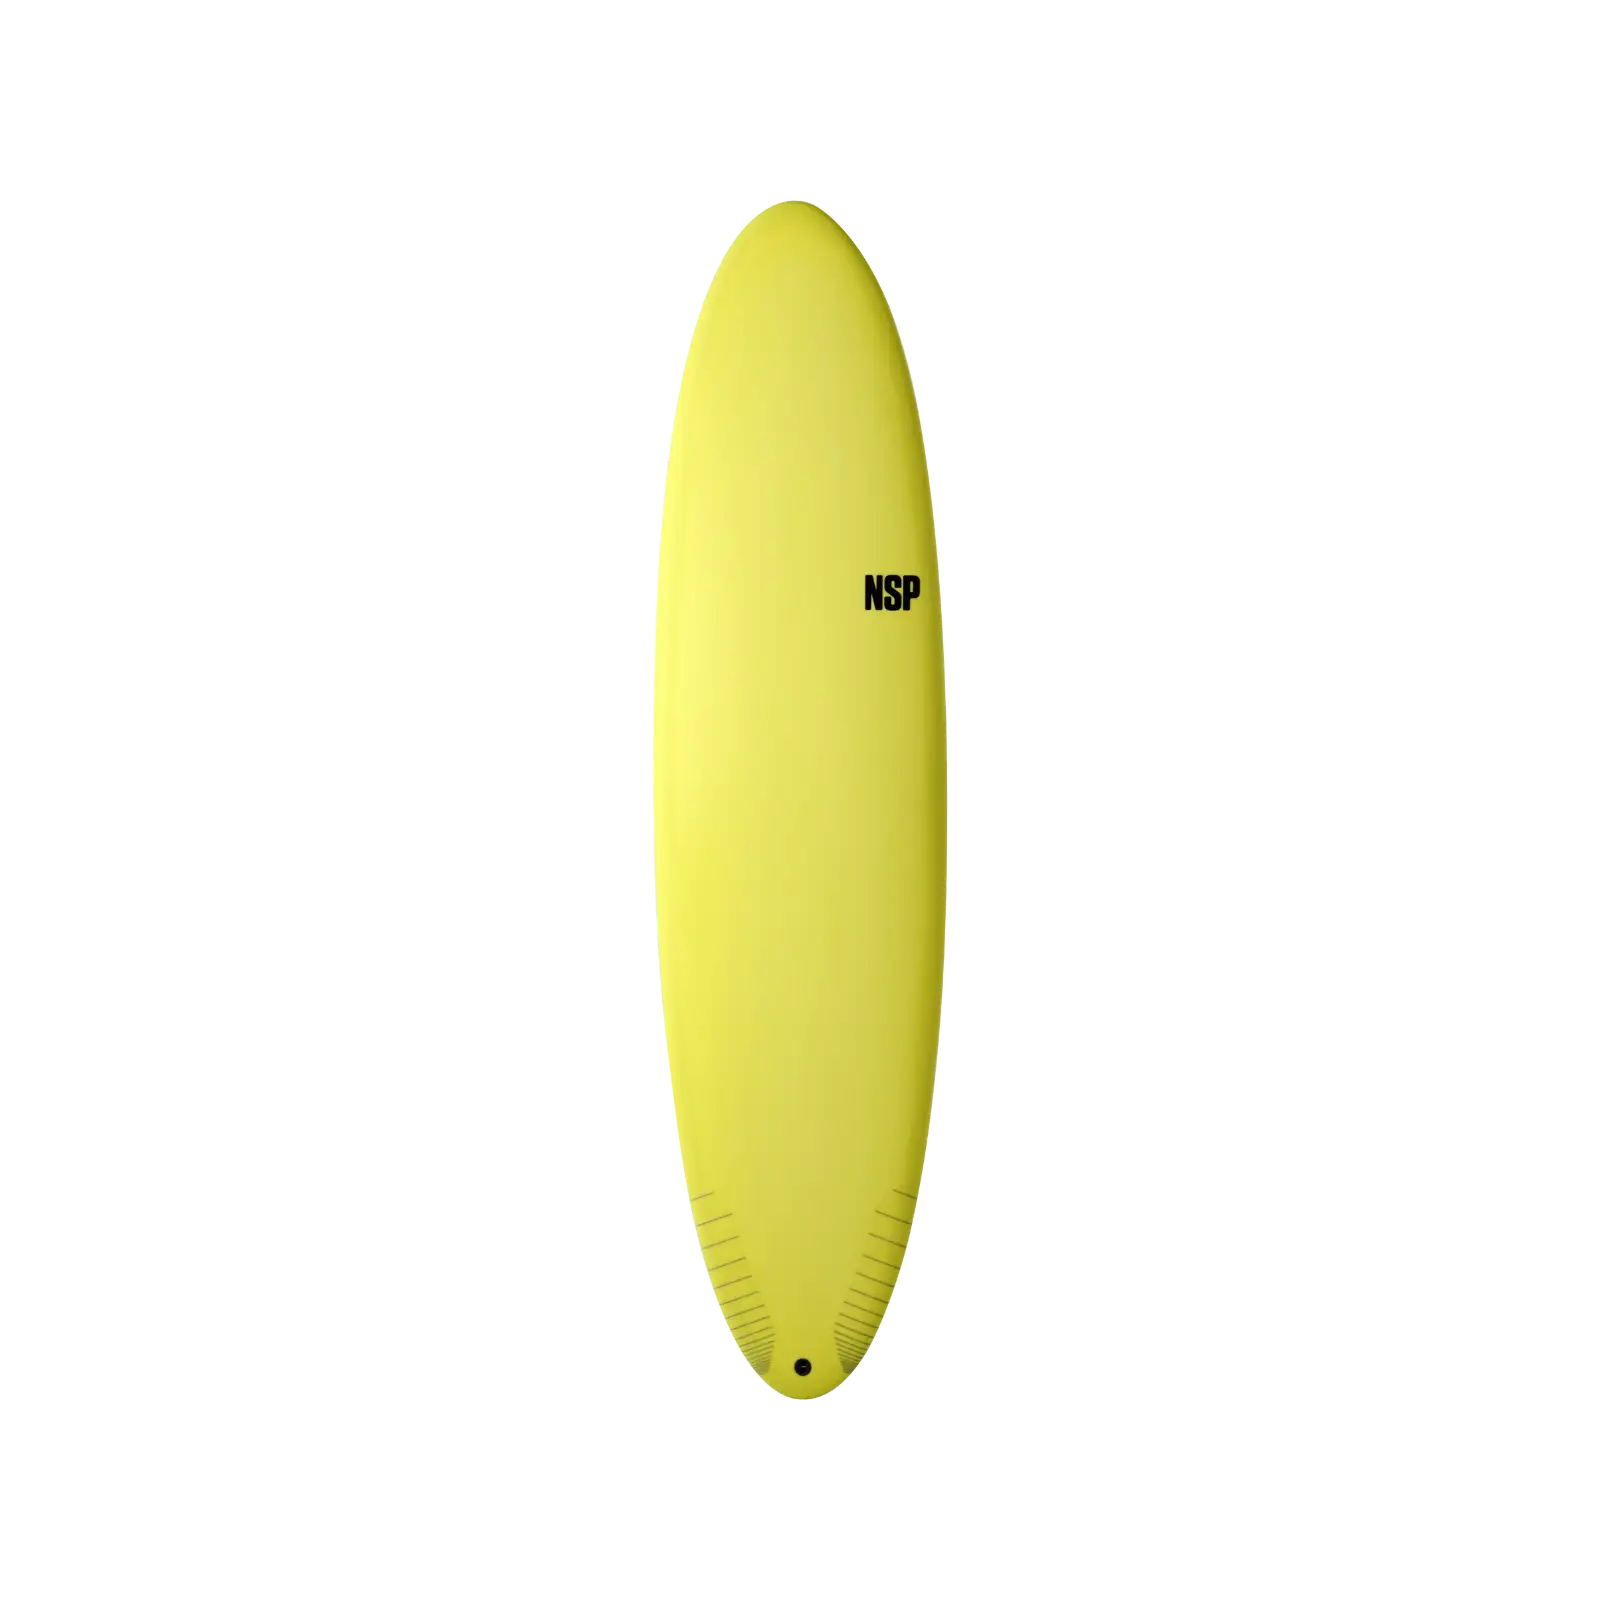 NSP Funboard 7'6 - Protech 7'6